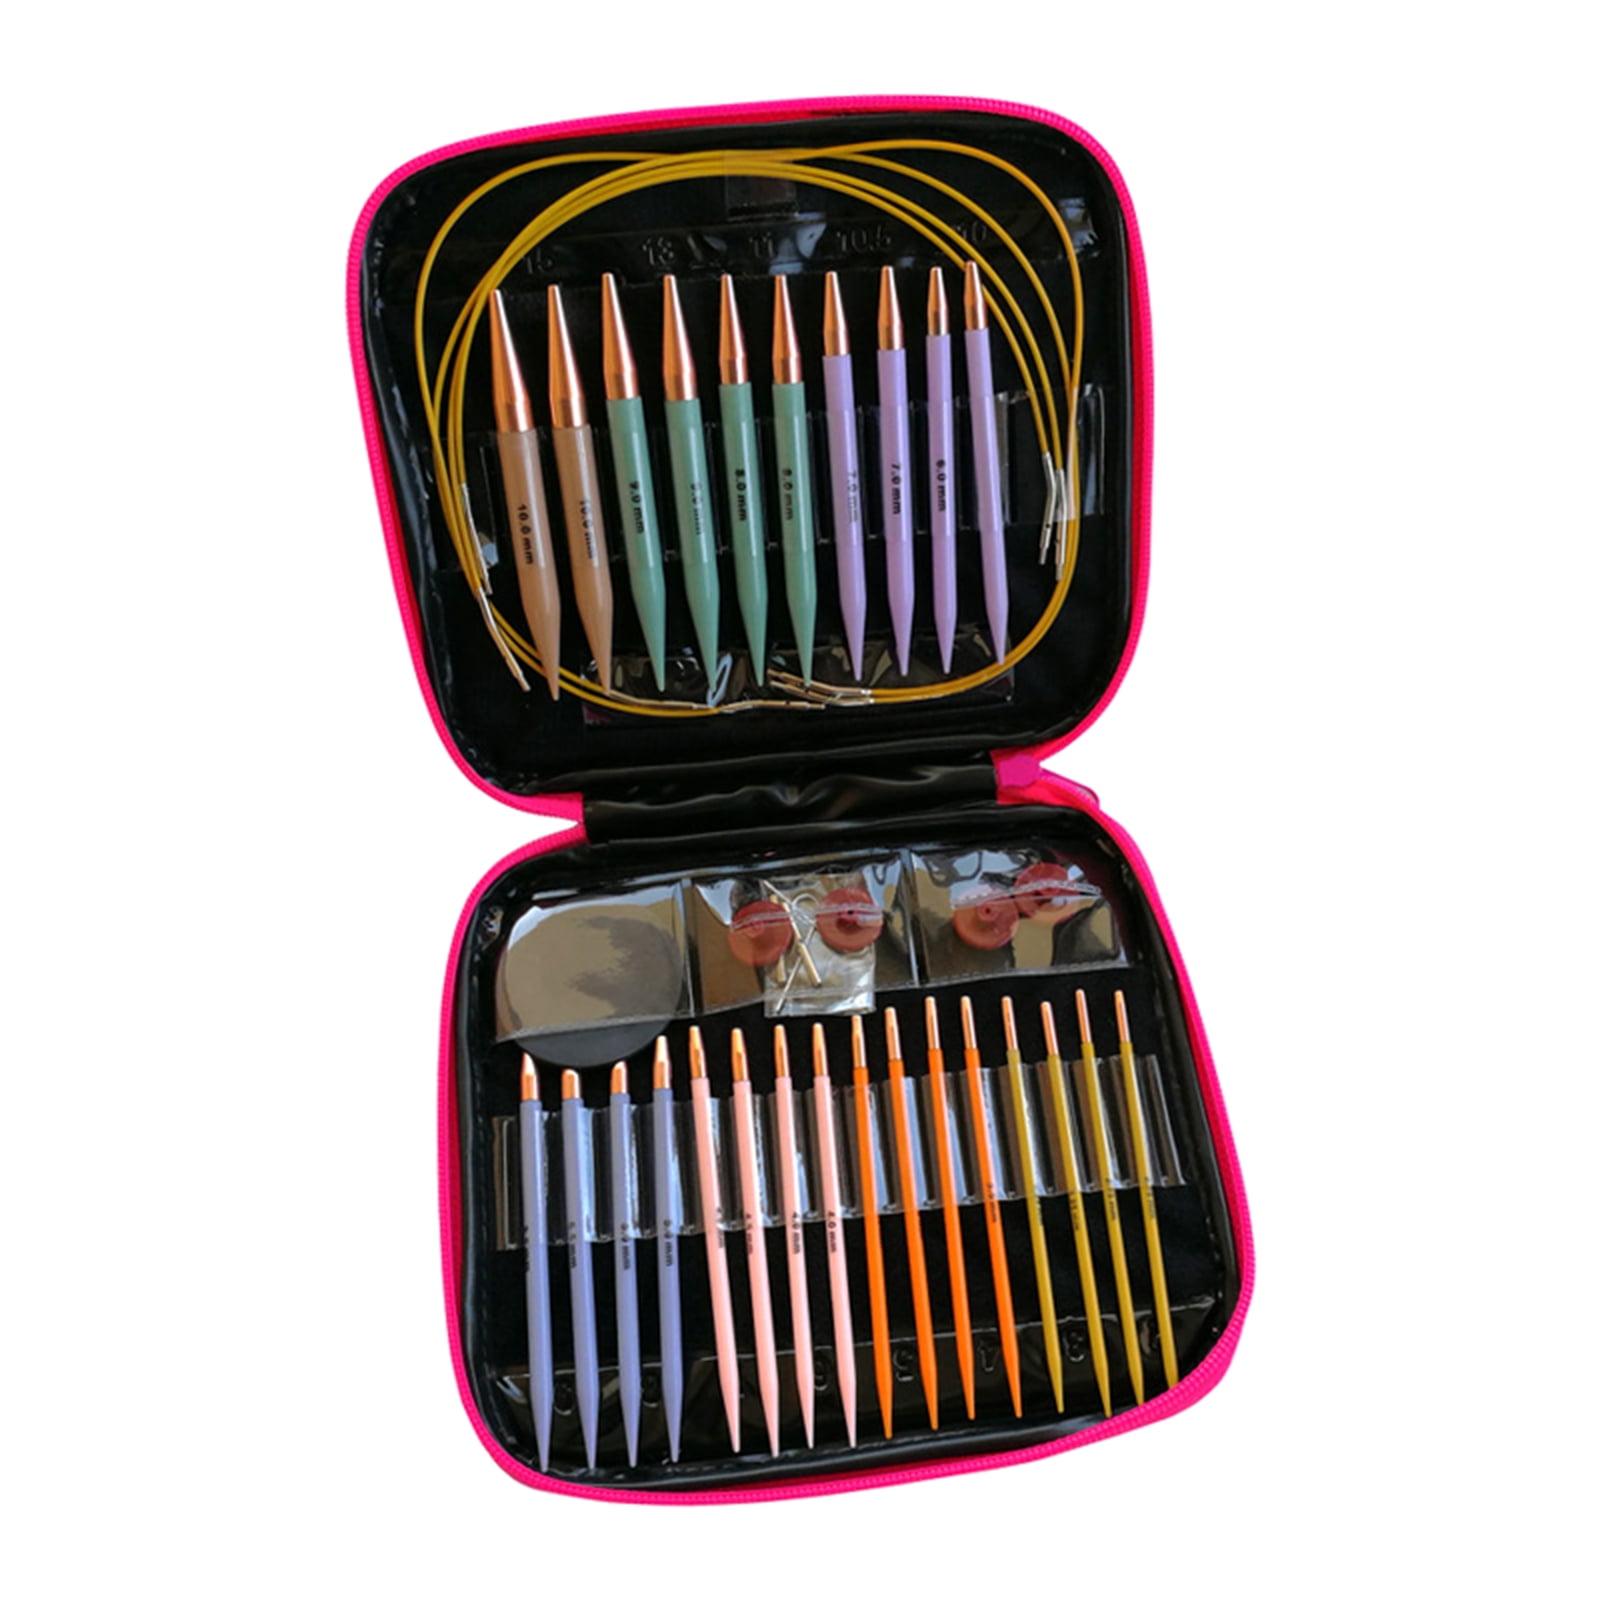 Different Sizes Circular Knitting Needles with Storage Case Knitting Needles Set Suitable for Beginners or DIY Craft Lover Use Full DIY Craft Kits Interchangeable Knitting Needles Set